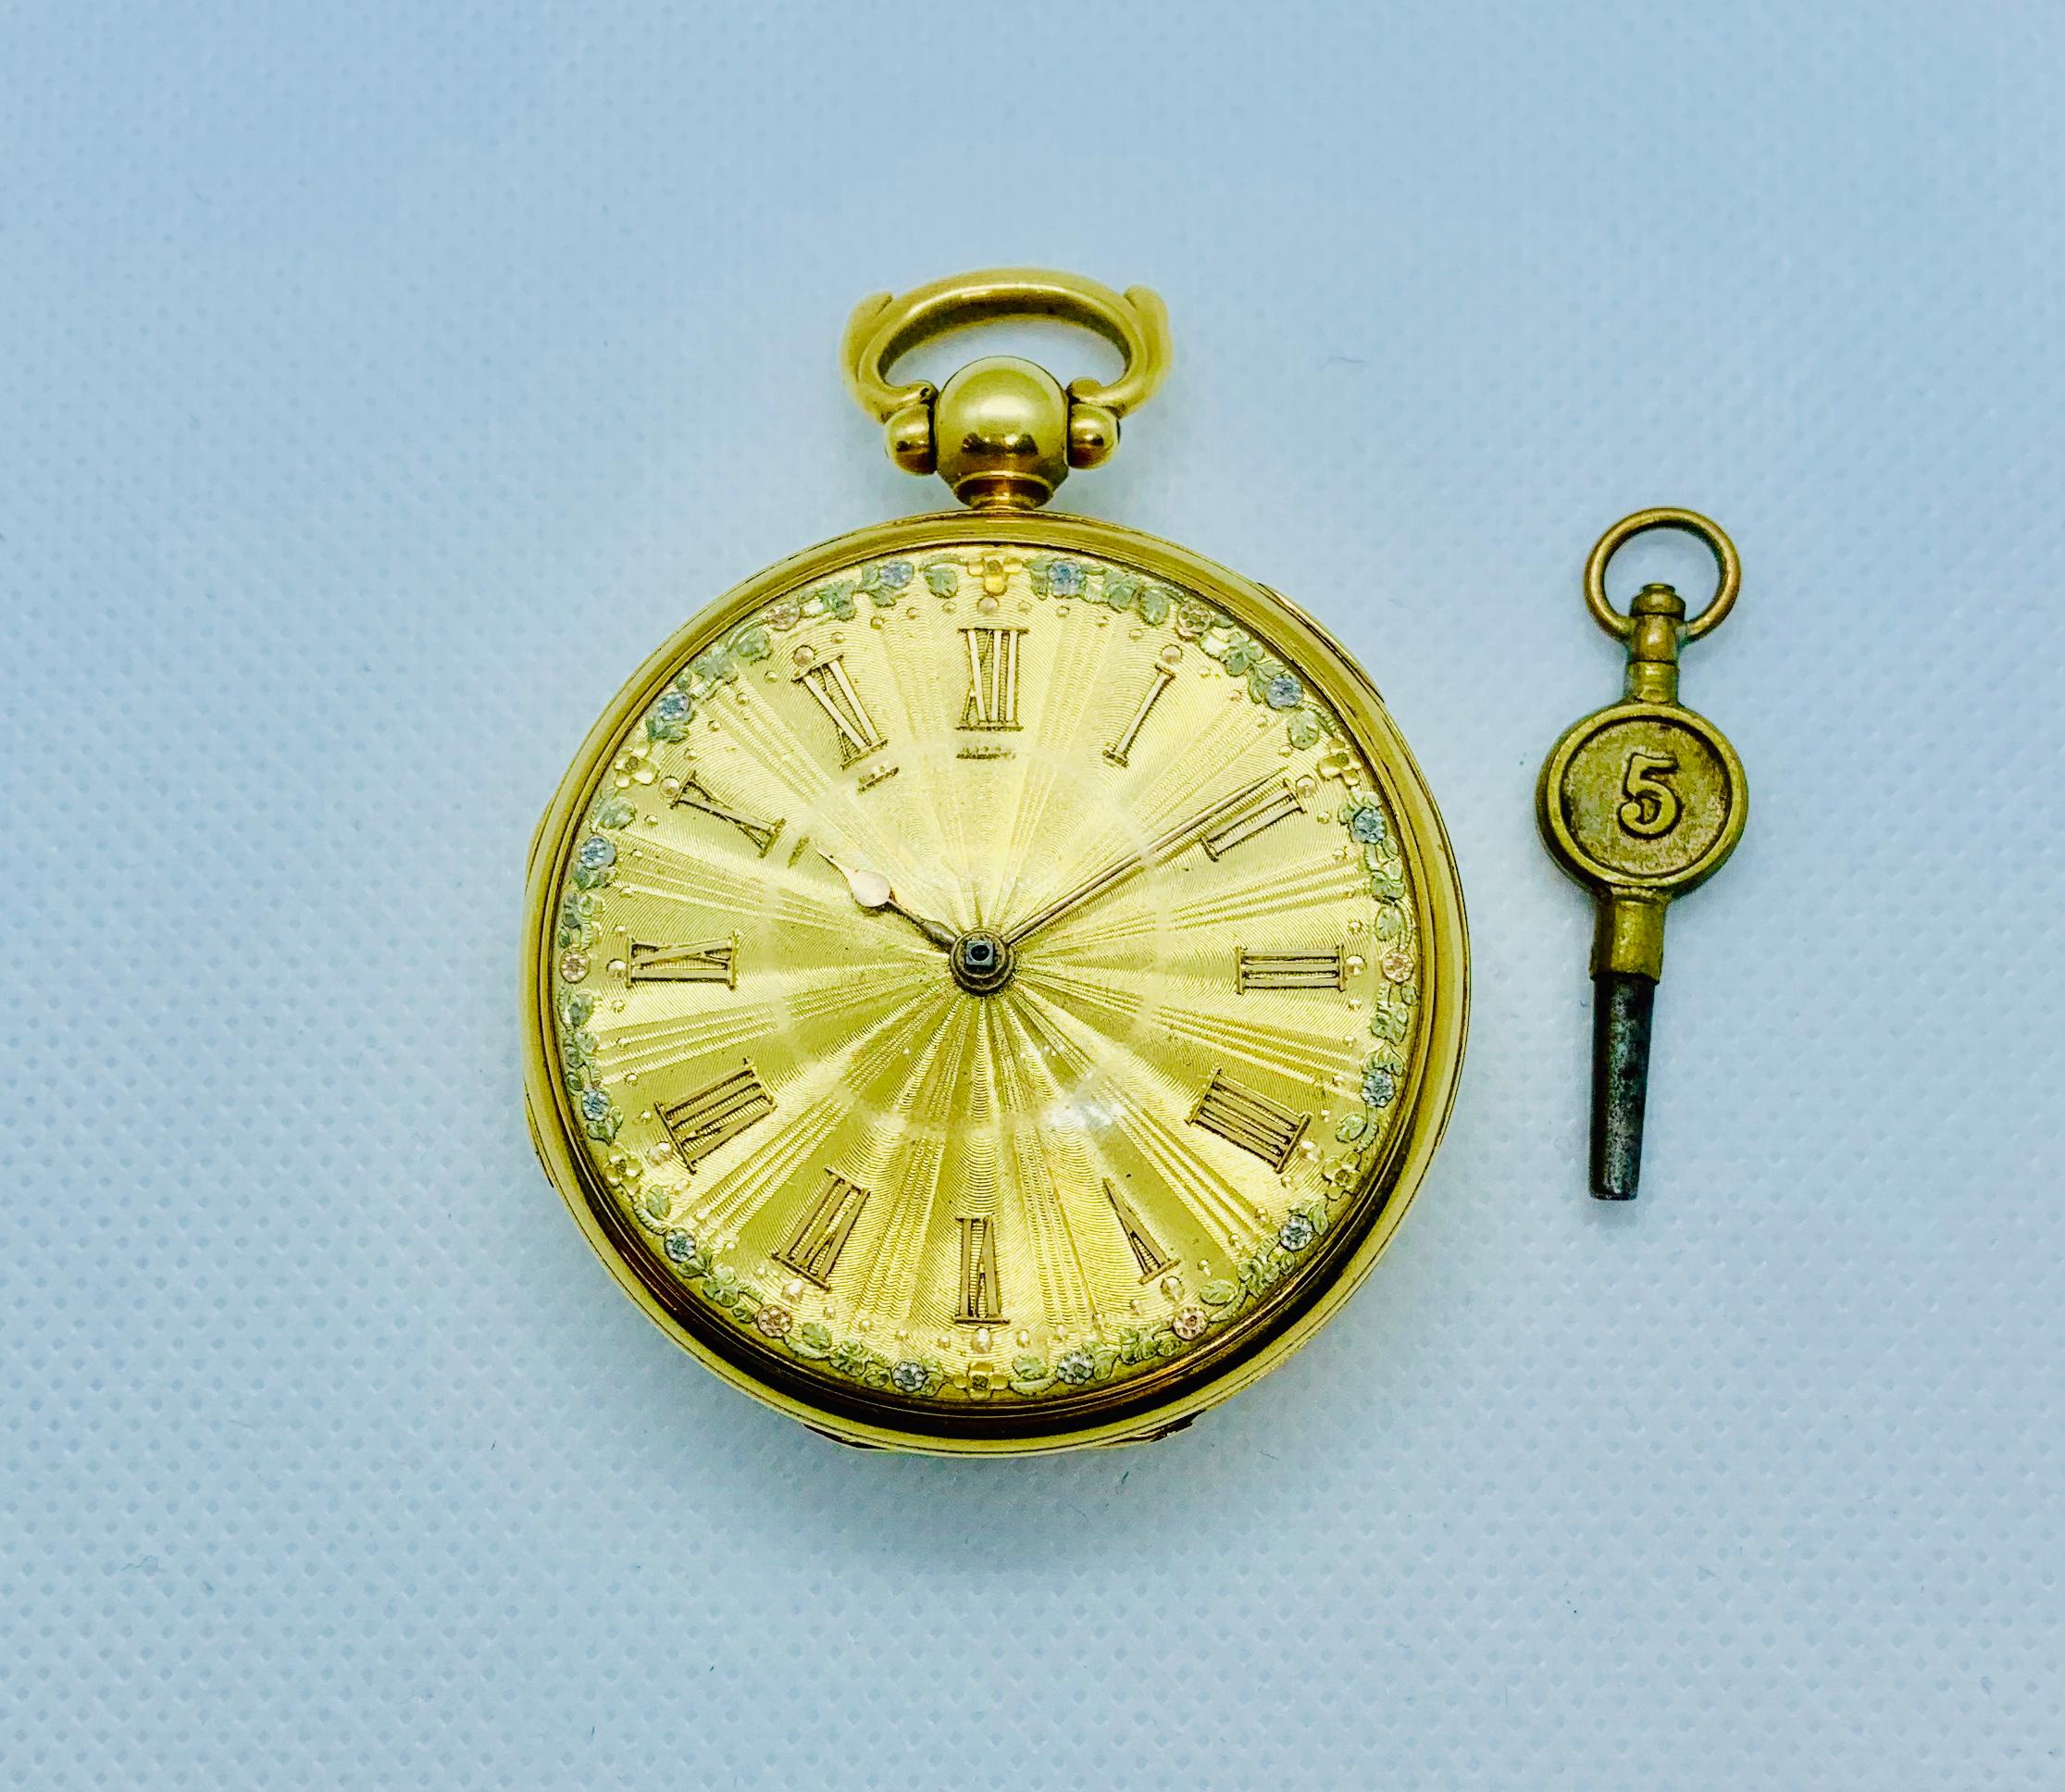 Absolutely Gorgeous John Moncas Liverpool Pocket watch! This watch is in solid 18K Yellow Gold and is Key Wind and Key Set. It has Fussee Movement, Sapphire Jewels, Diamond End Stone and Lever Escapement. Made in the 1830's it has a beautifully